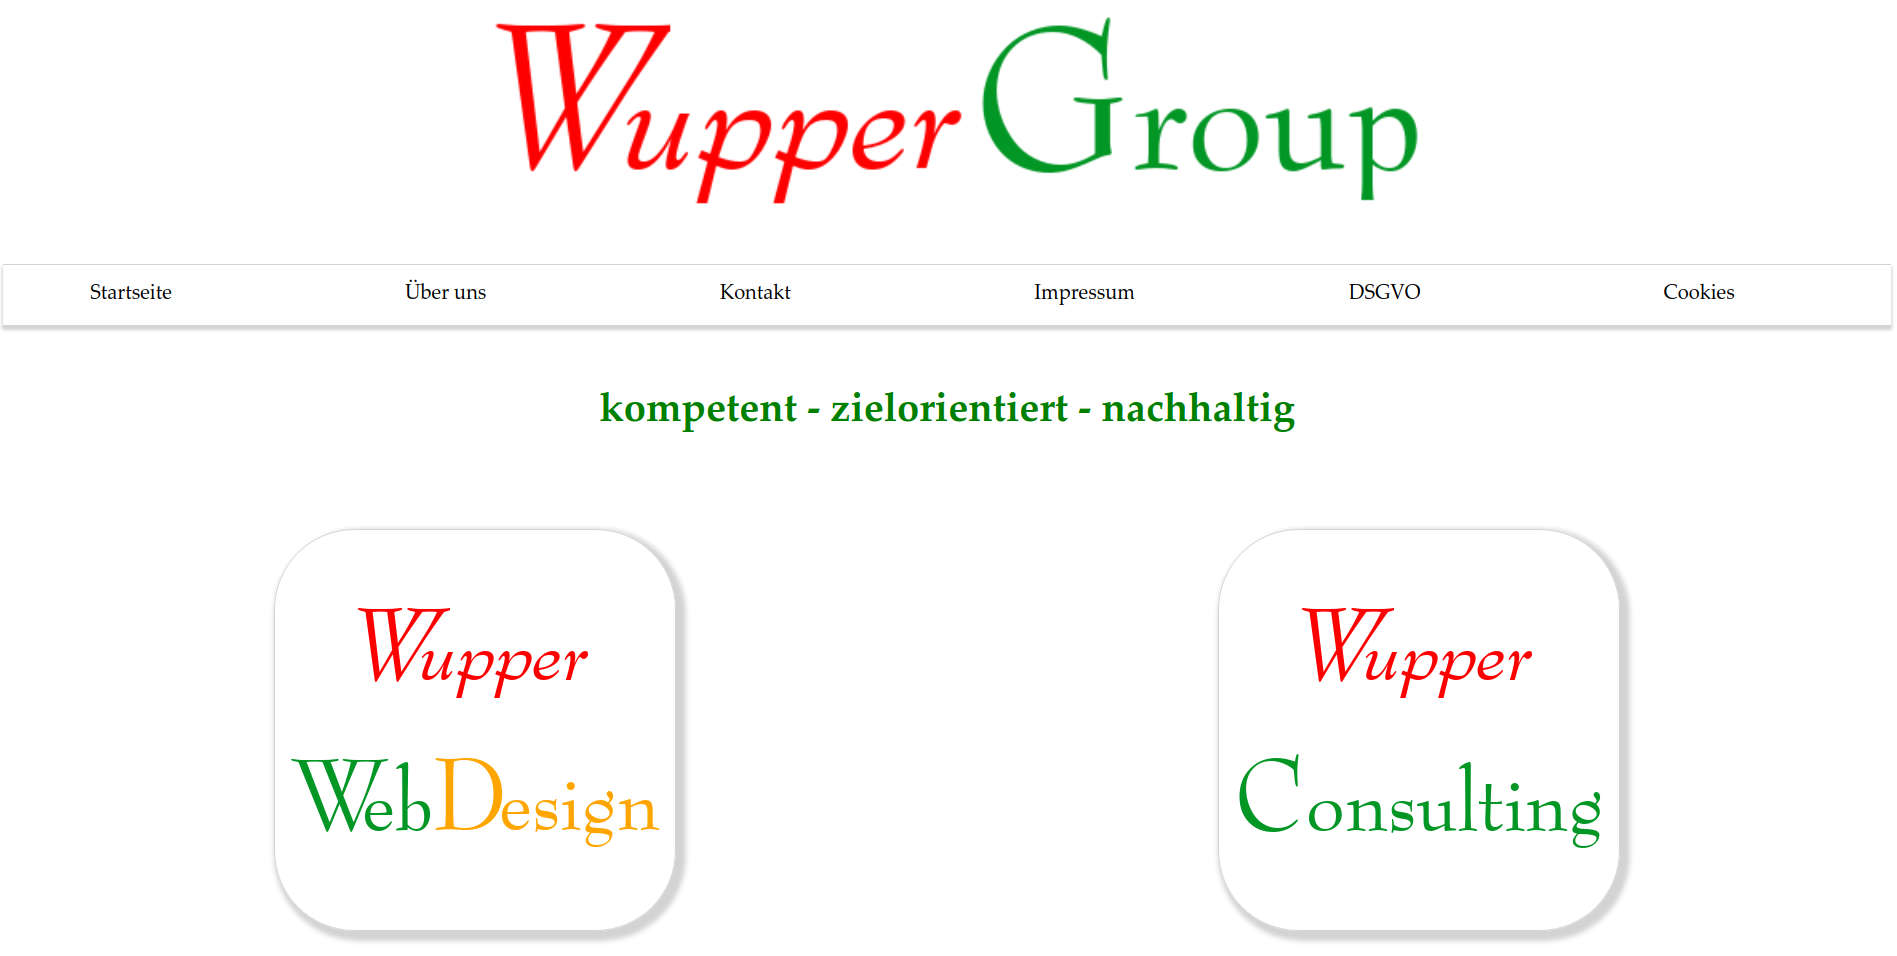 WupperGroup 2020